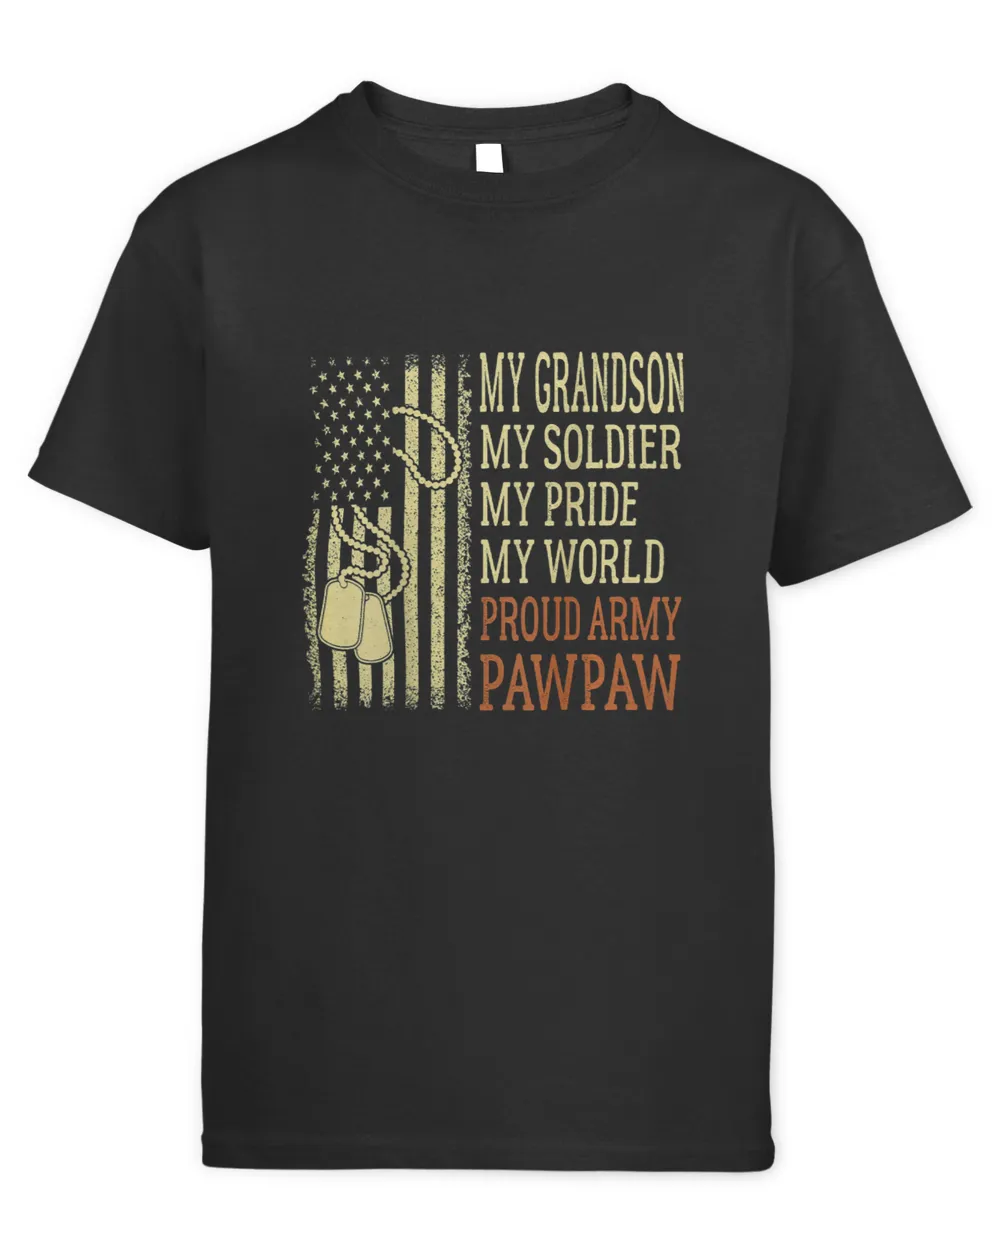 Mens My Grandson My Soldier Proud Army Pawpaw Military Grandpa